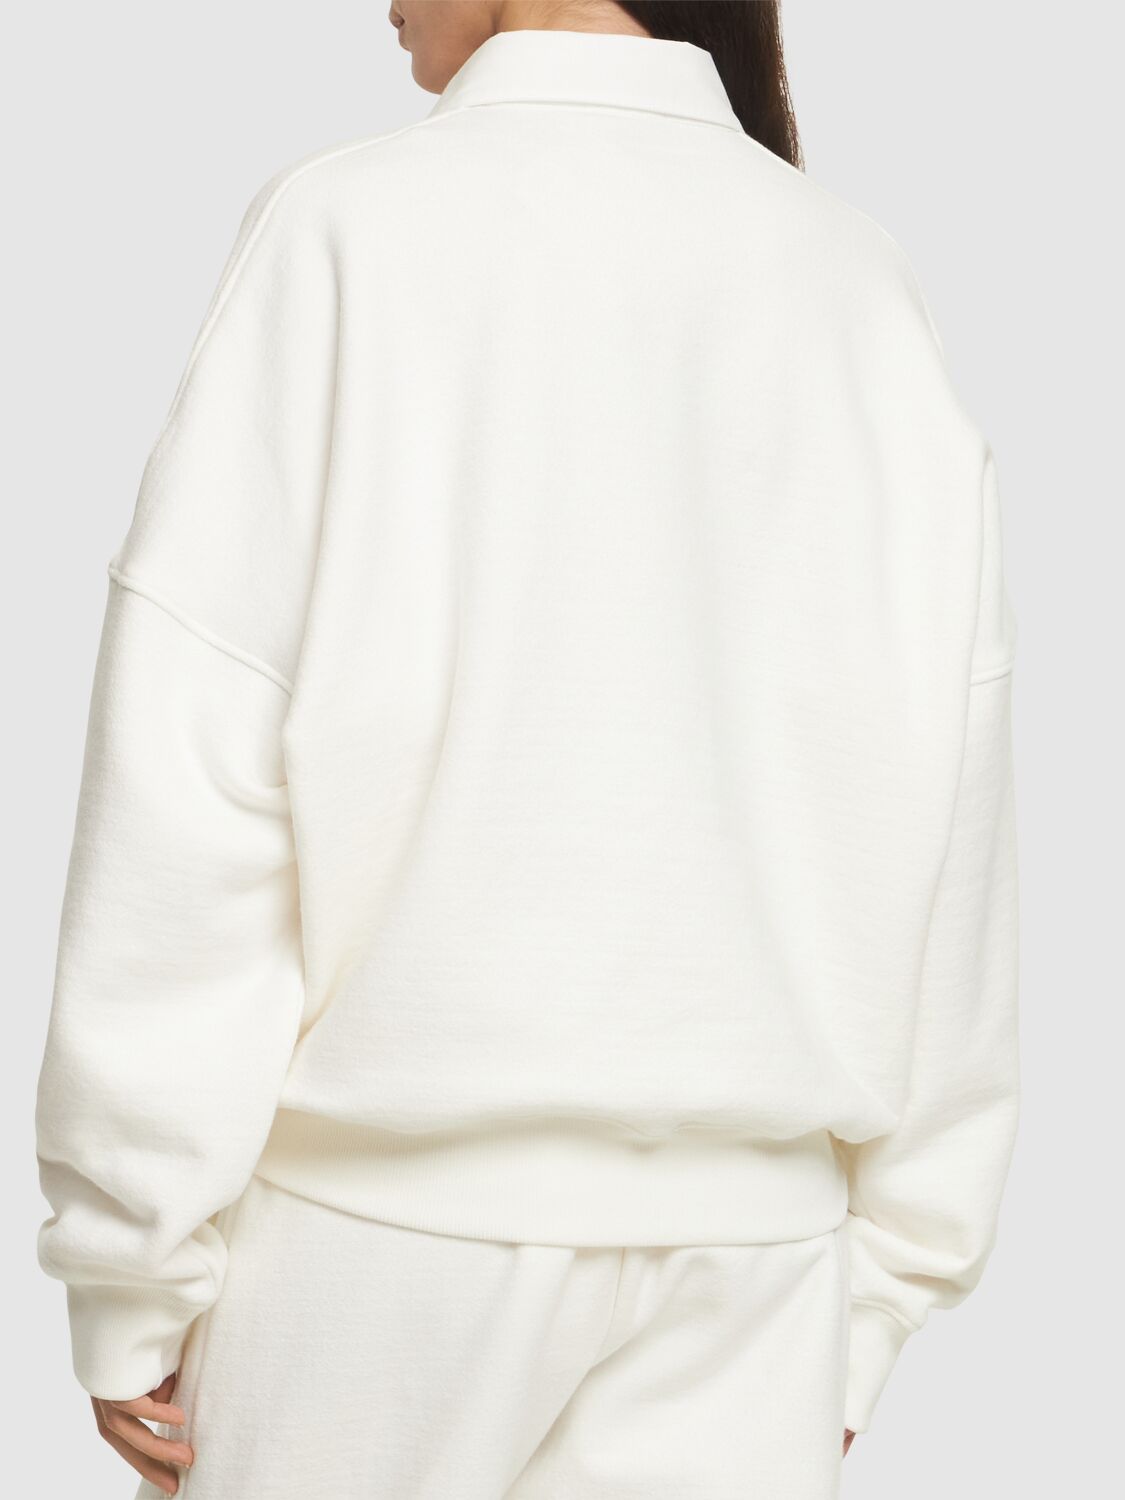 Shop The Row Dende Cotton Blend Knit Polo Sweatshirt In White